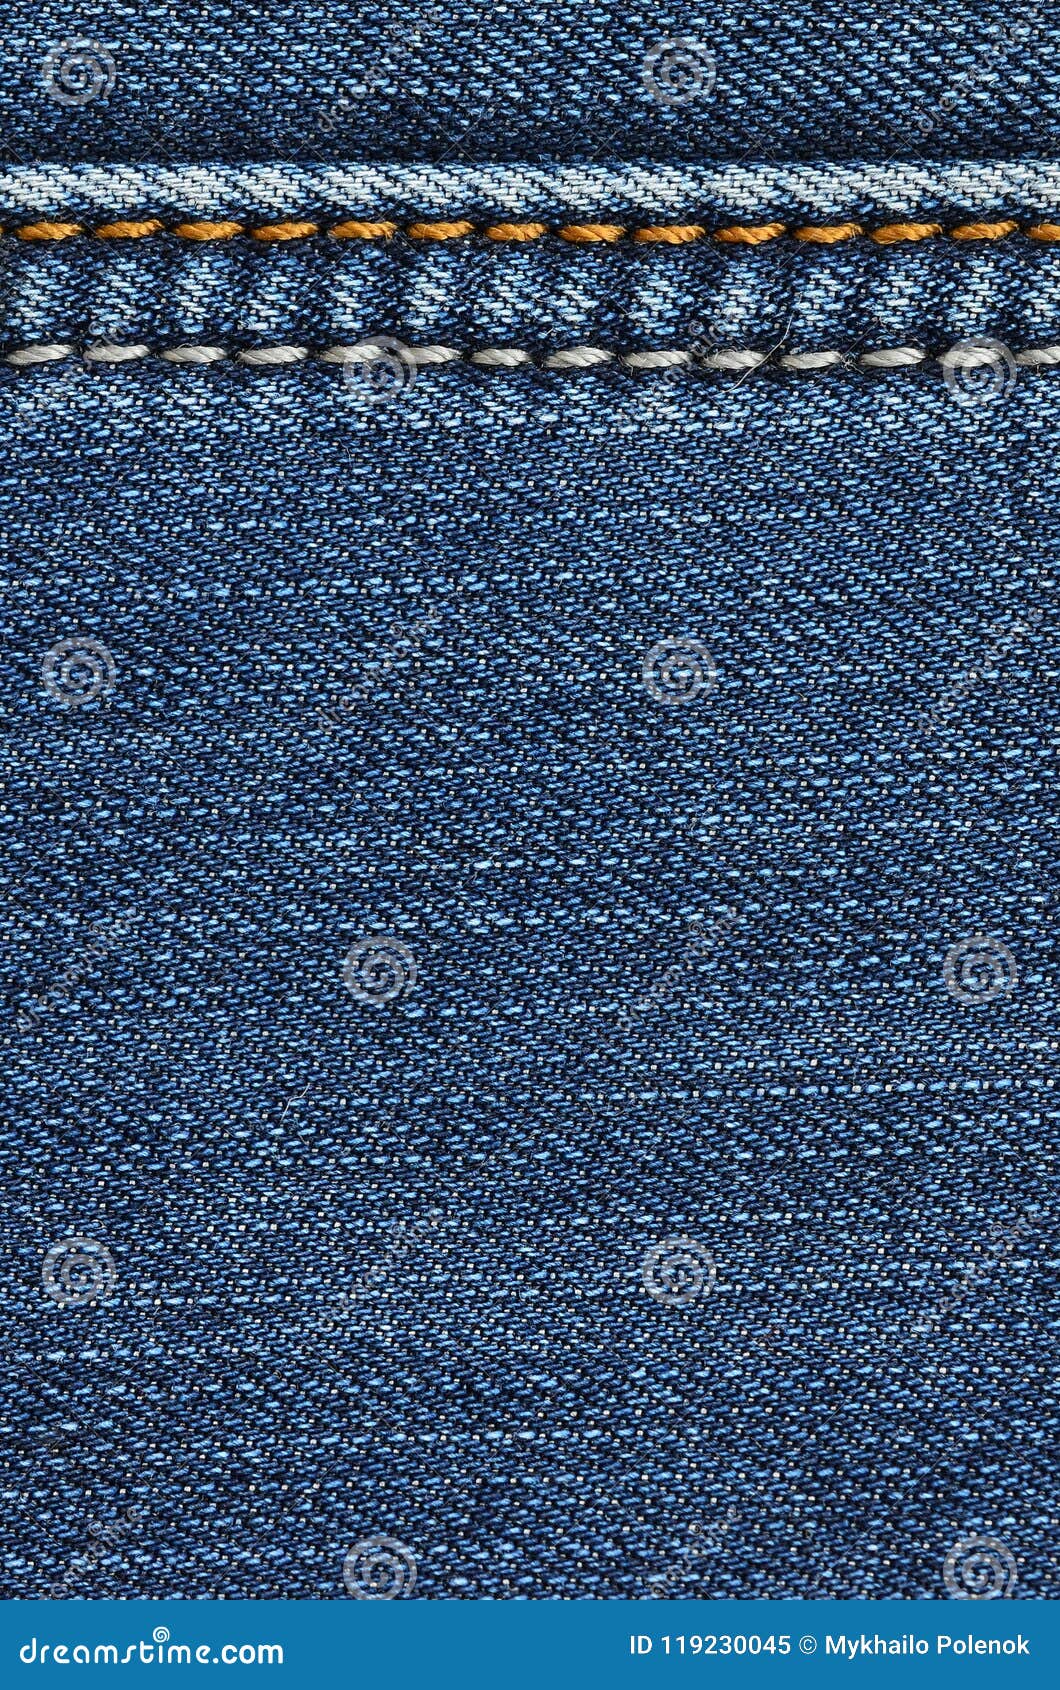 Jeans of Texture Background. Jeans of Texture Vintage Background Stock ...